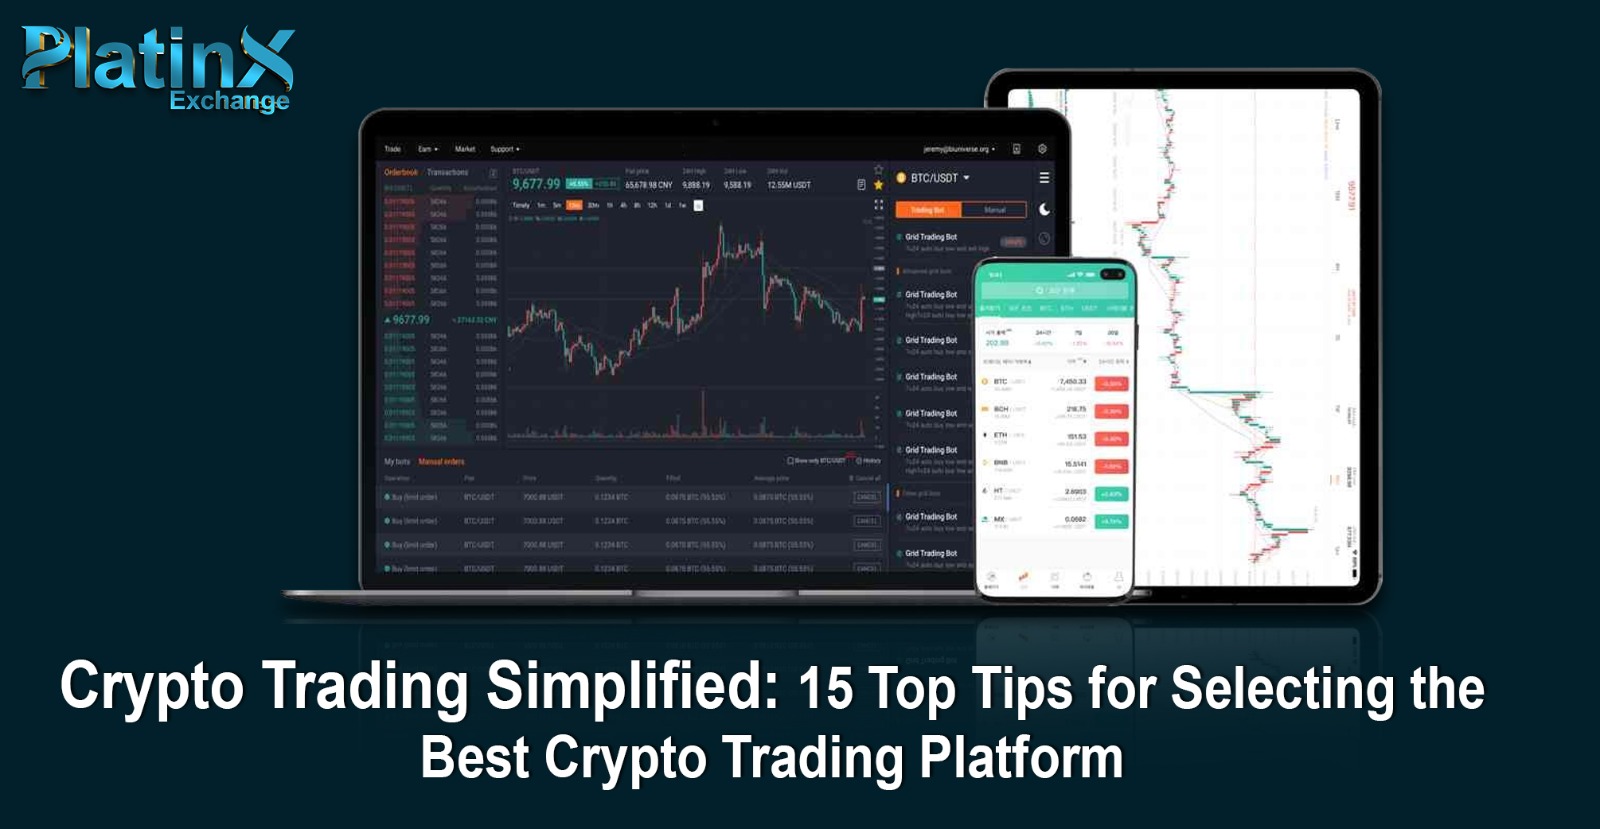 Crypto Trading Simplified: 15 Top Tips for Selecting the Best Crypto Trading Platform